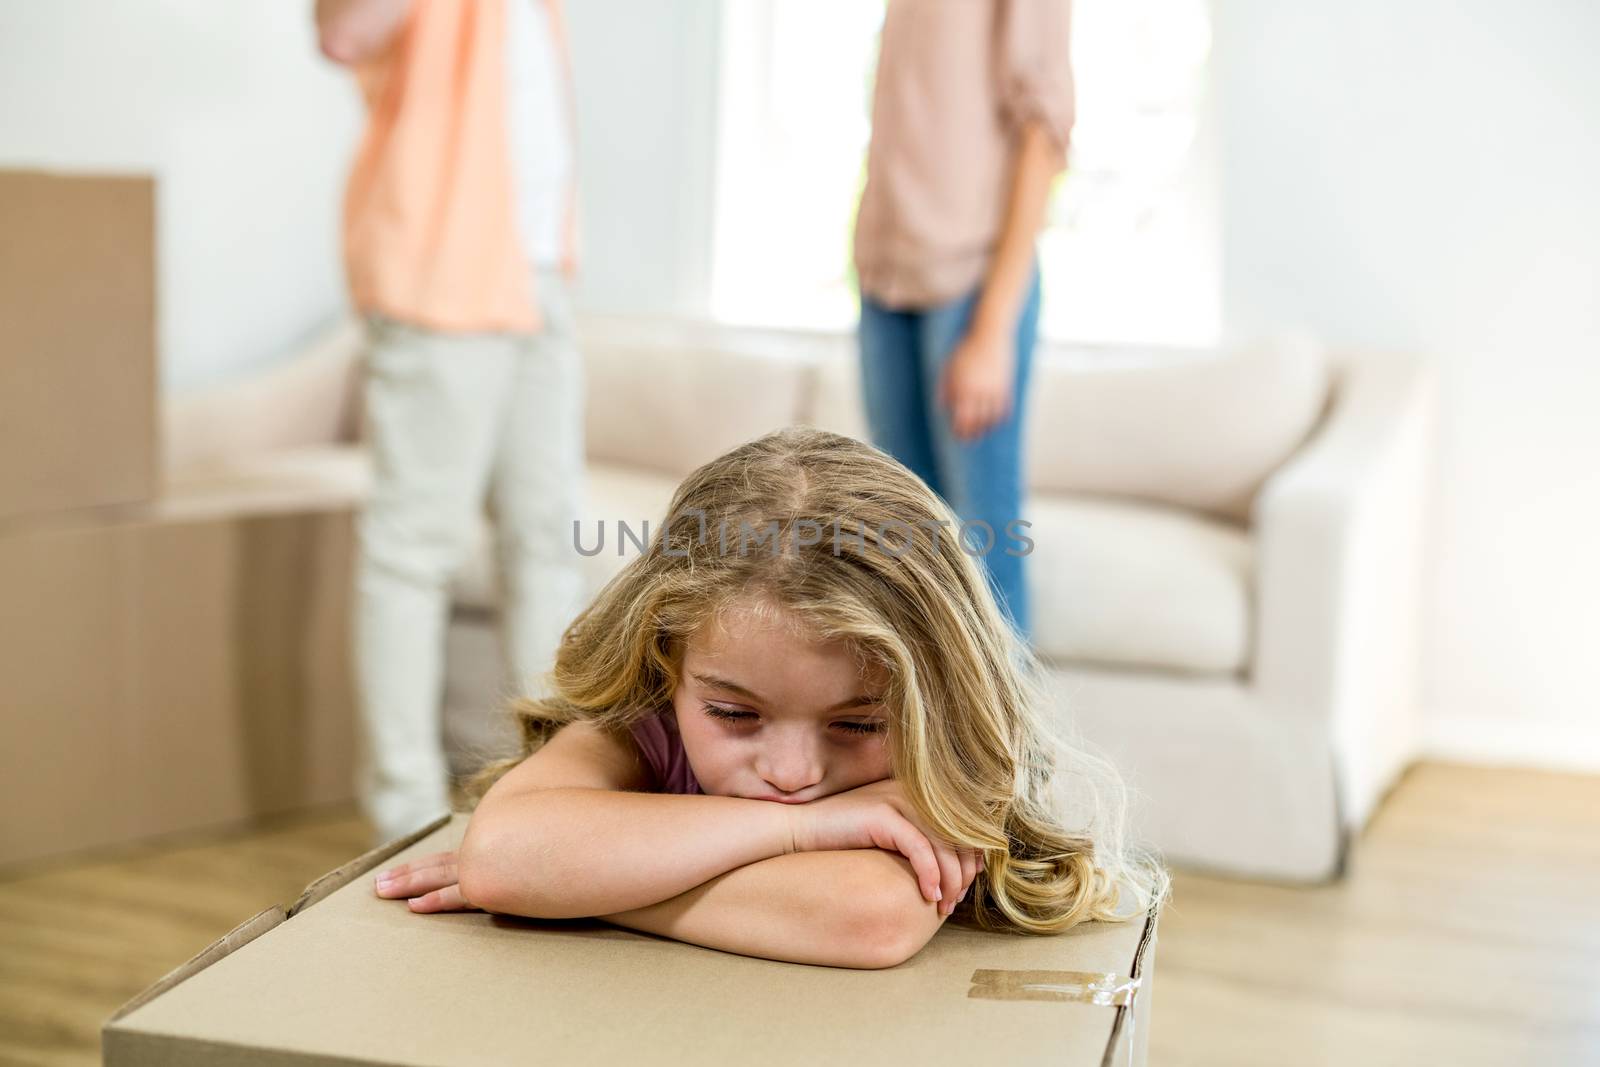 Close-up of upset girl leaning on box while parents standing in background